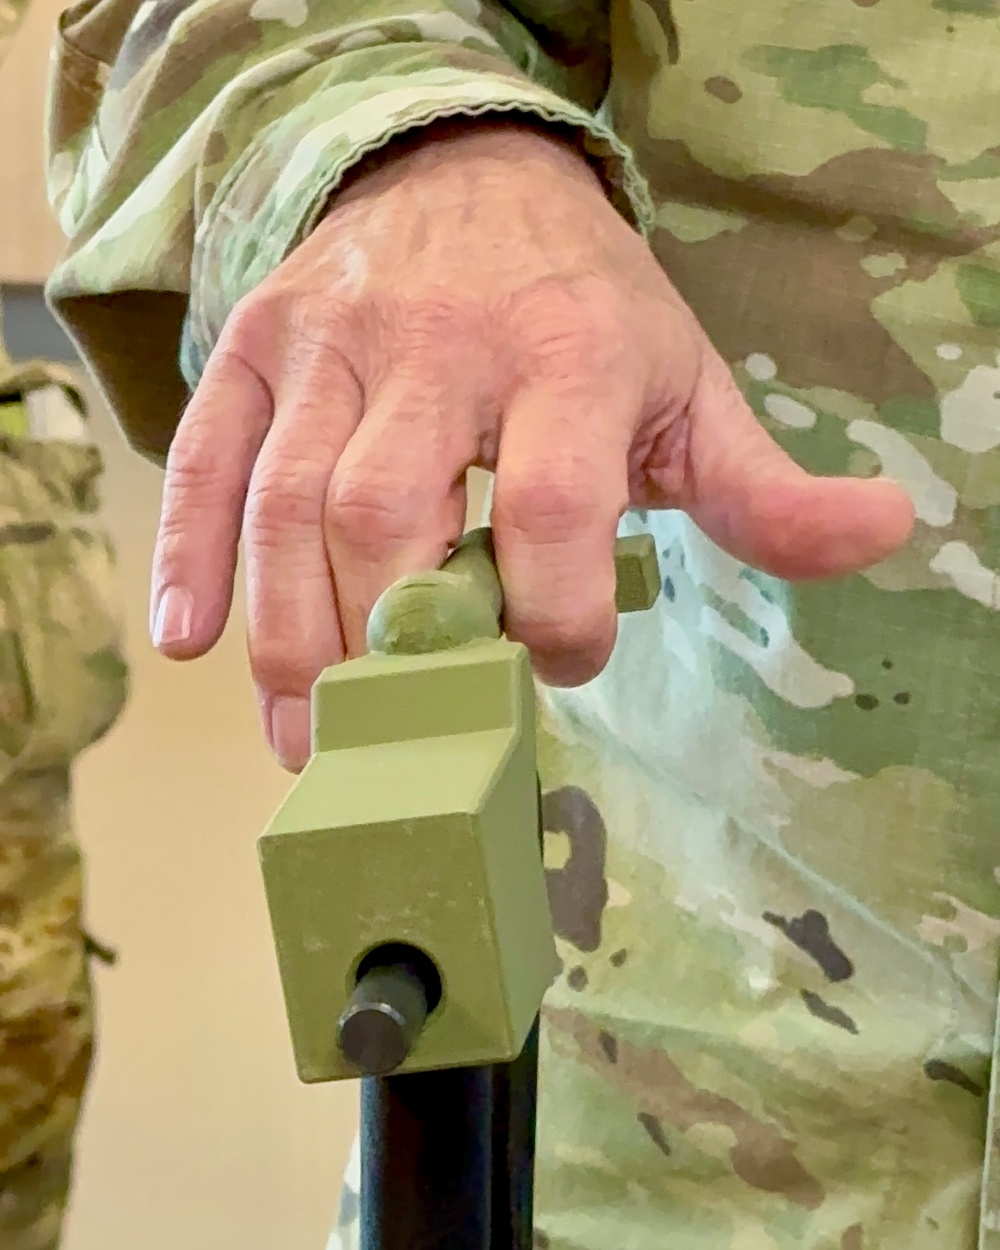 DVIDS Images Fort Campbell Soldiers’ Innovation Helps Extremities